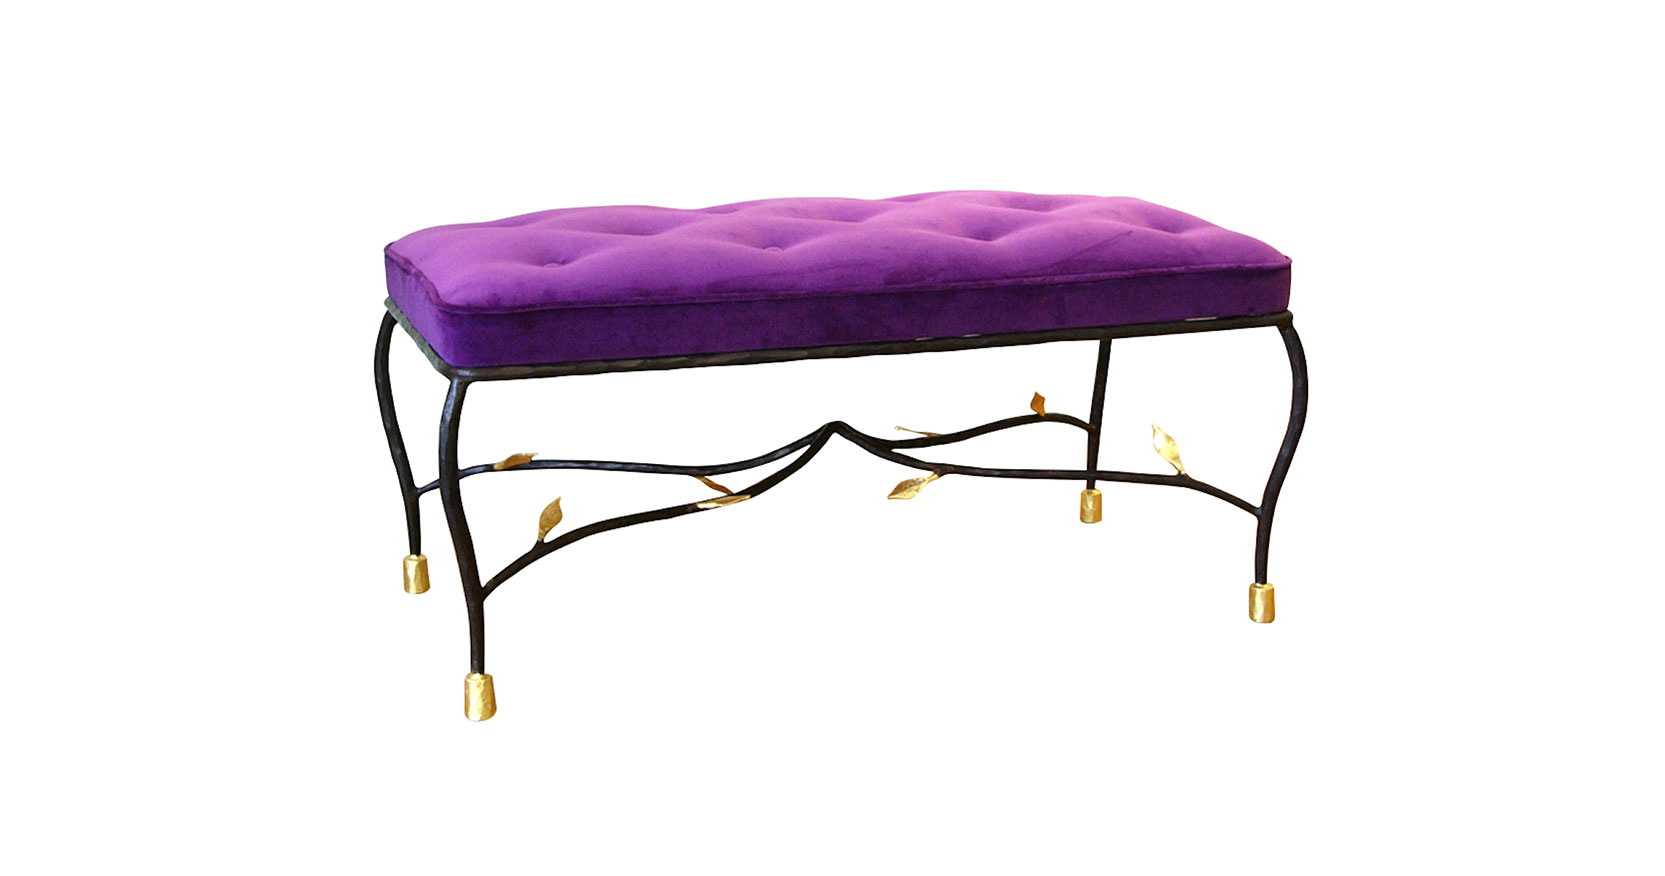 Garouste Bonetti, baroque bench in black wrought iron, with small leaves in gilded metal under the seat upholstered in buttoned purple velvet